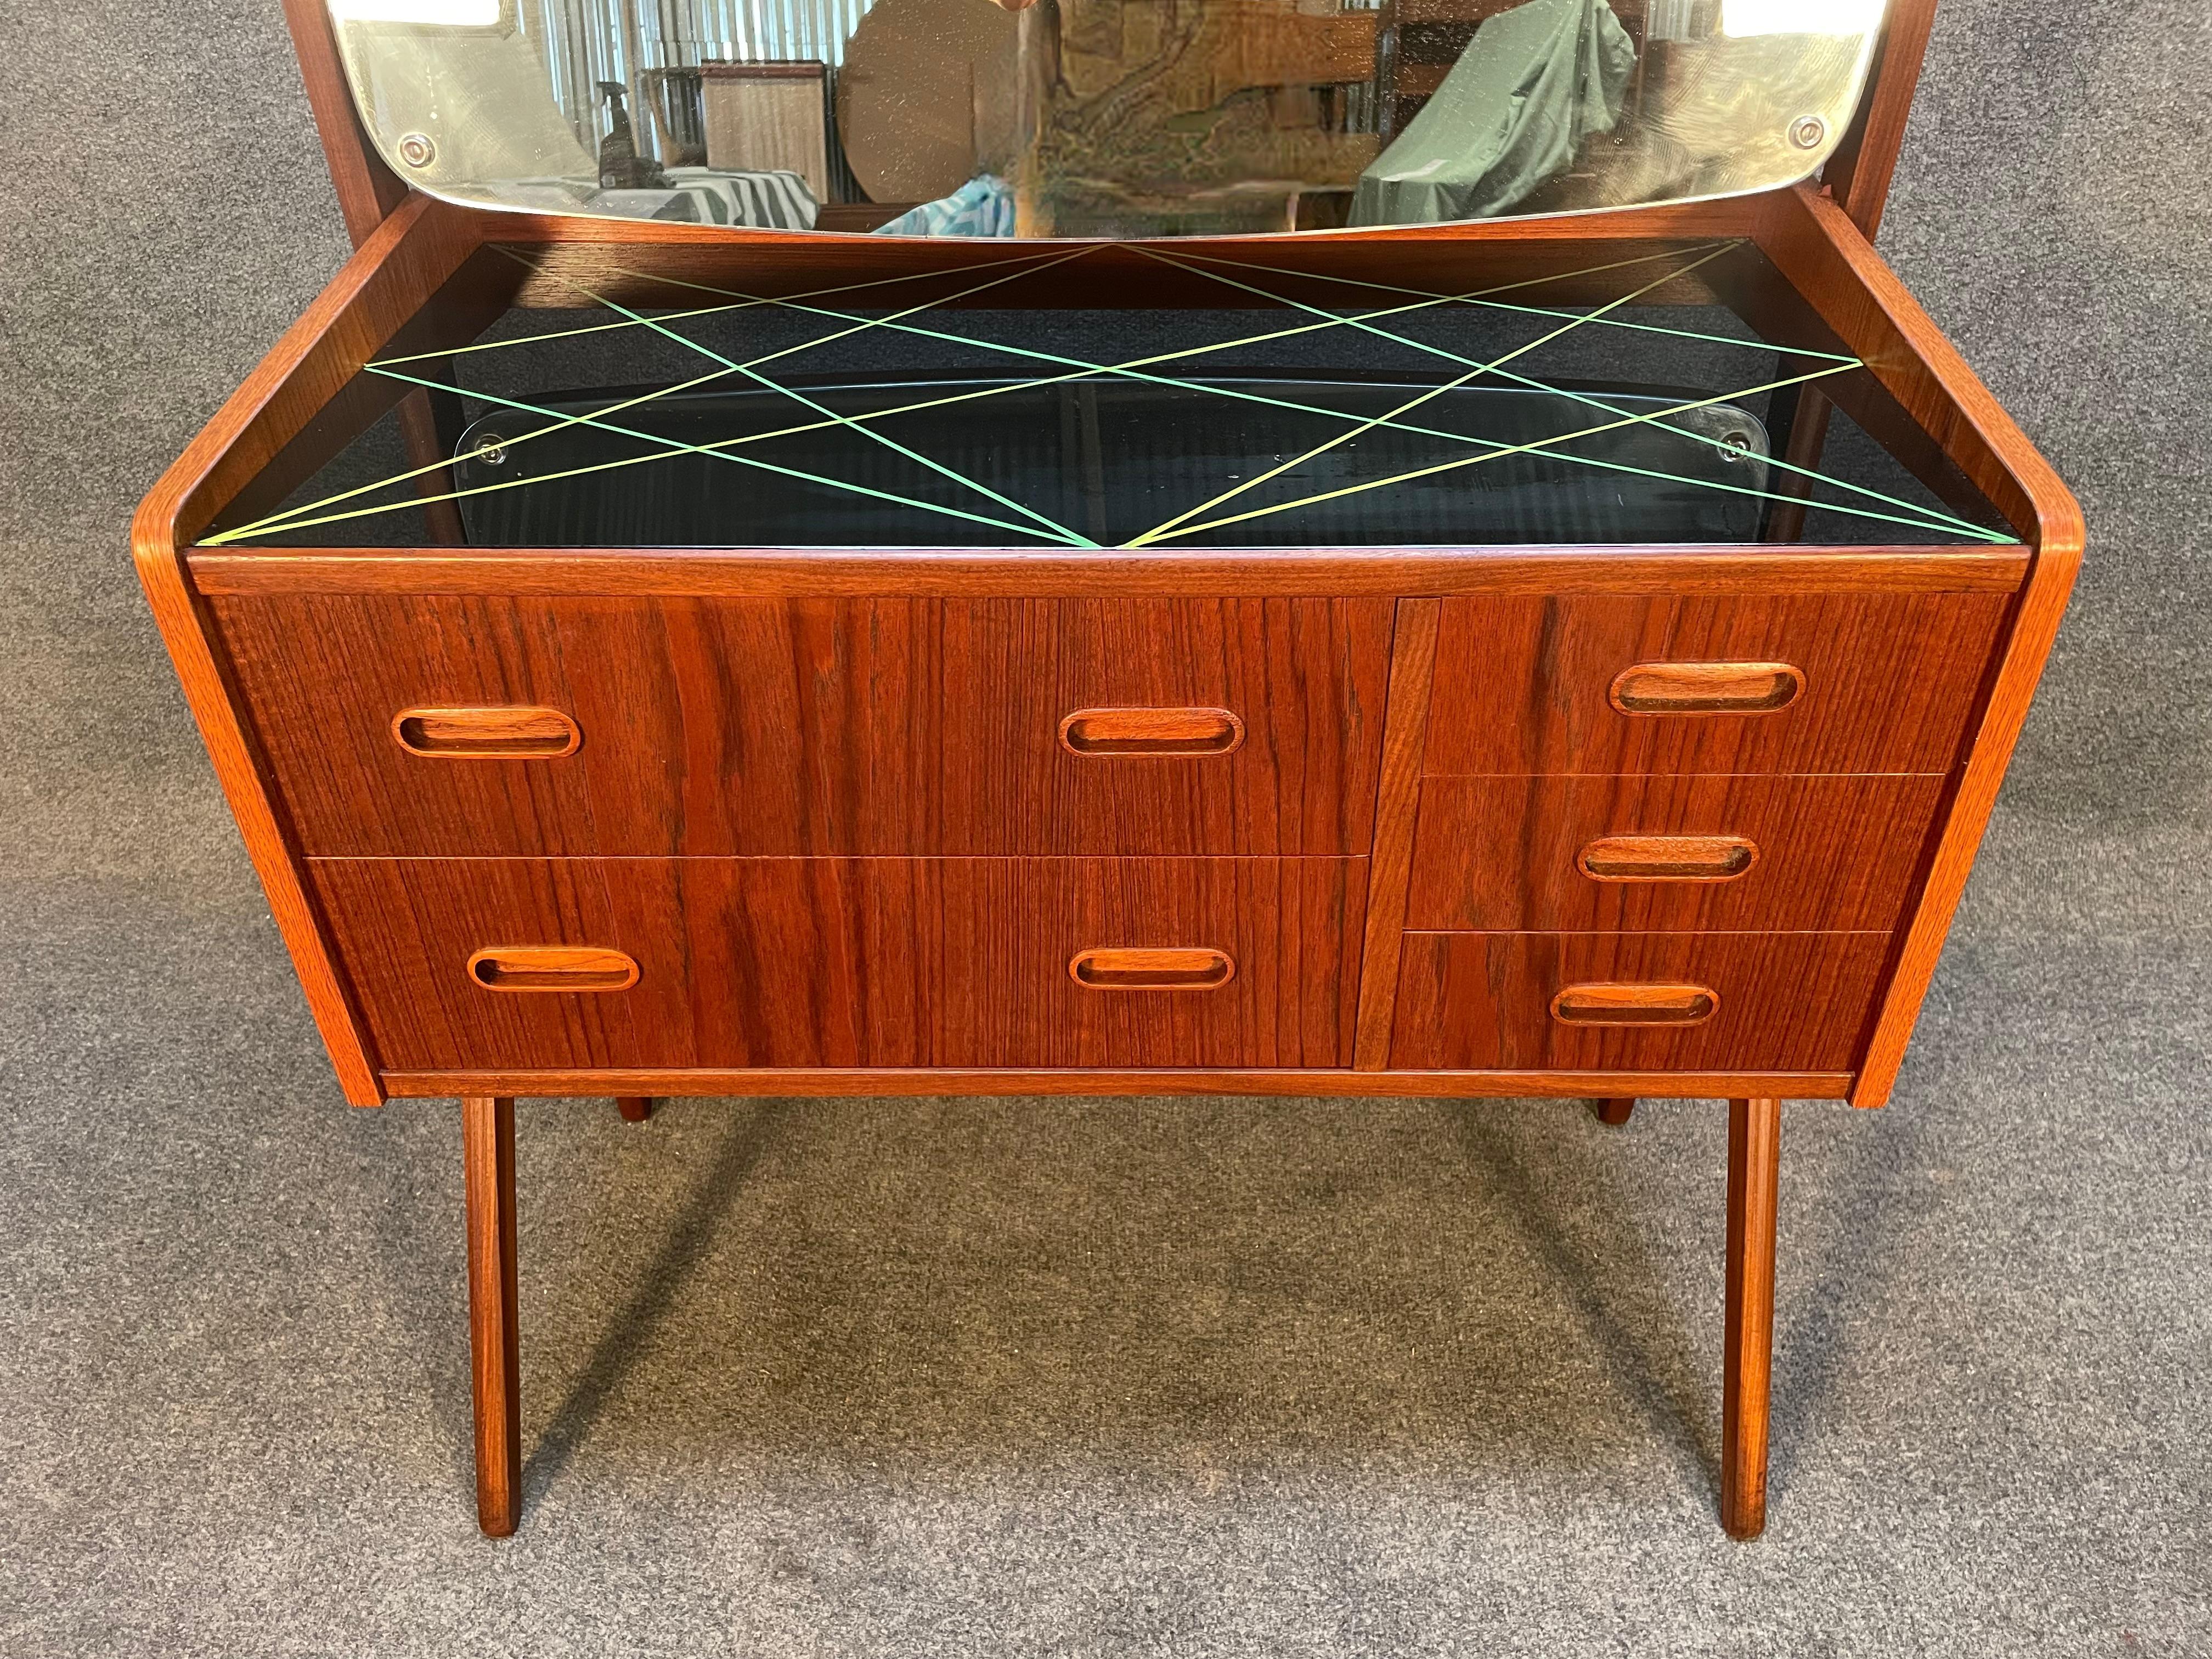 Here is a beautiful Scandinavian modern teak dressing table manufactured by Vinde Mobelfabrik in Denmark in the 1960's recently imported from Europe to California before its refinishing.
This lovely piece features 2 large drawers + 3 small drawers